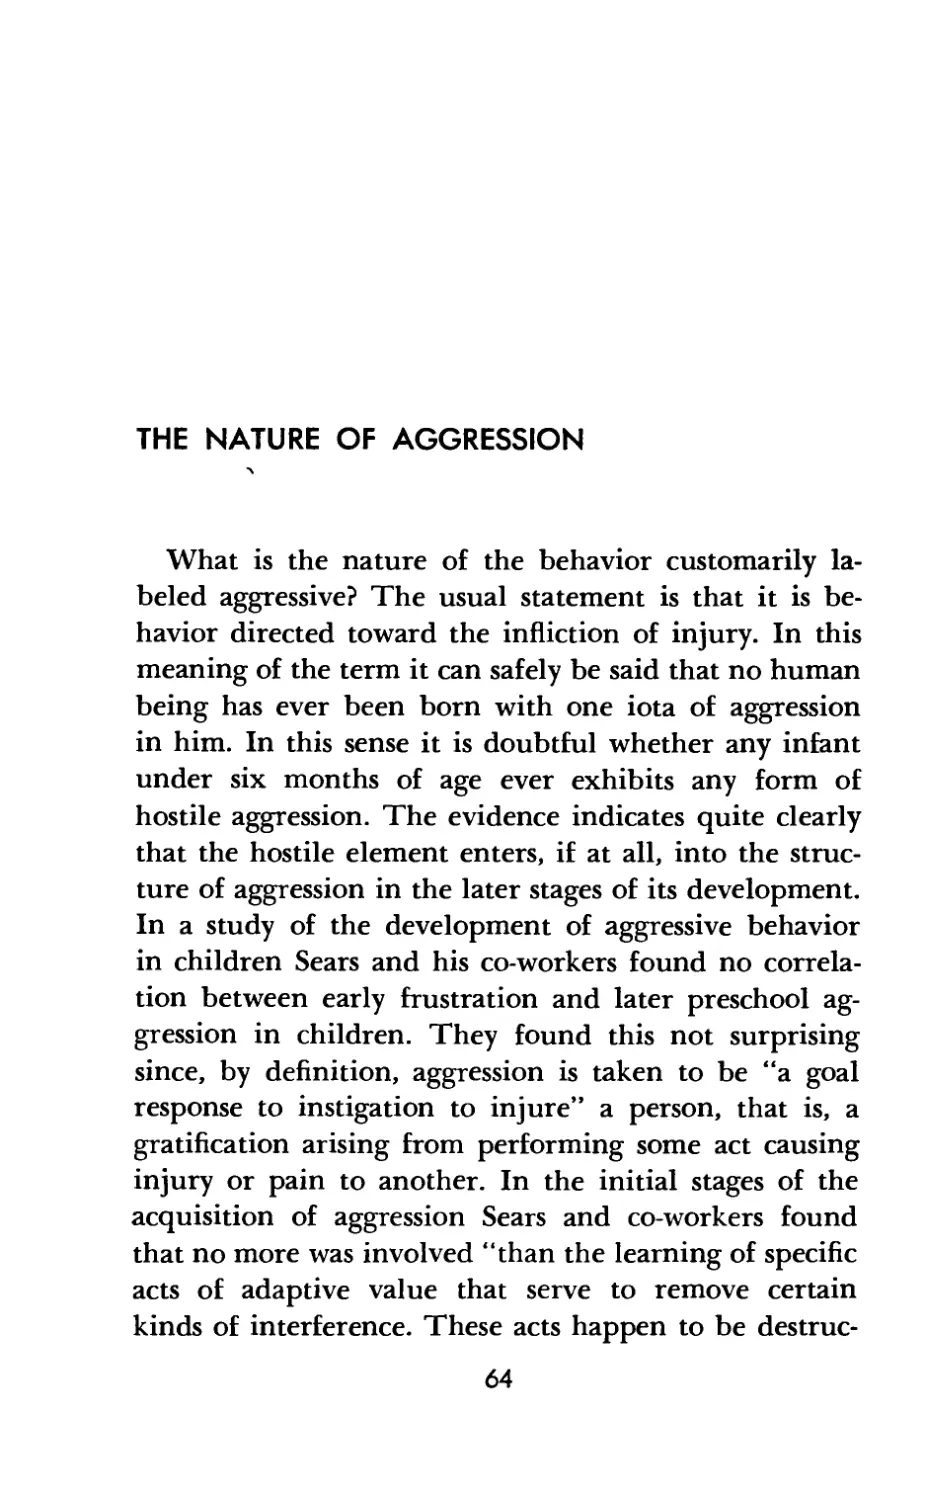 The Nature of Aggression